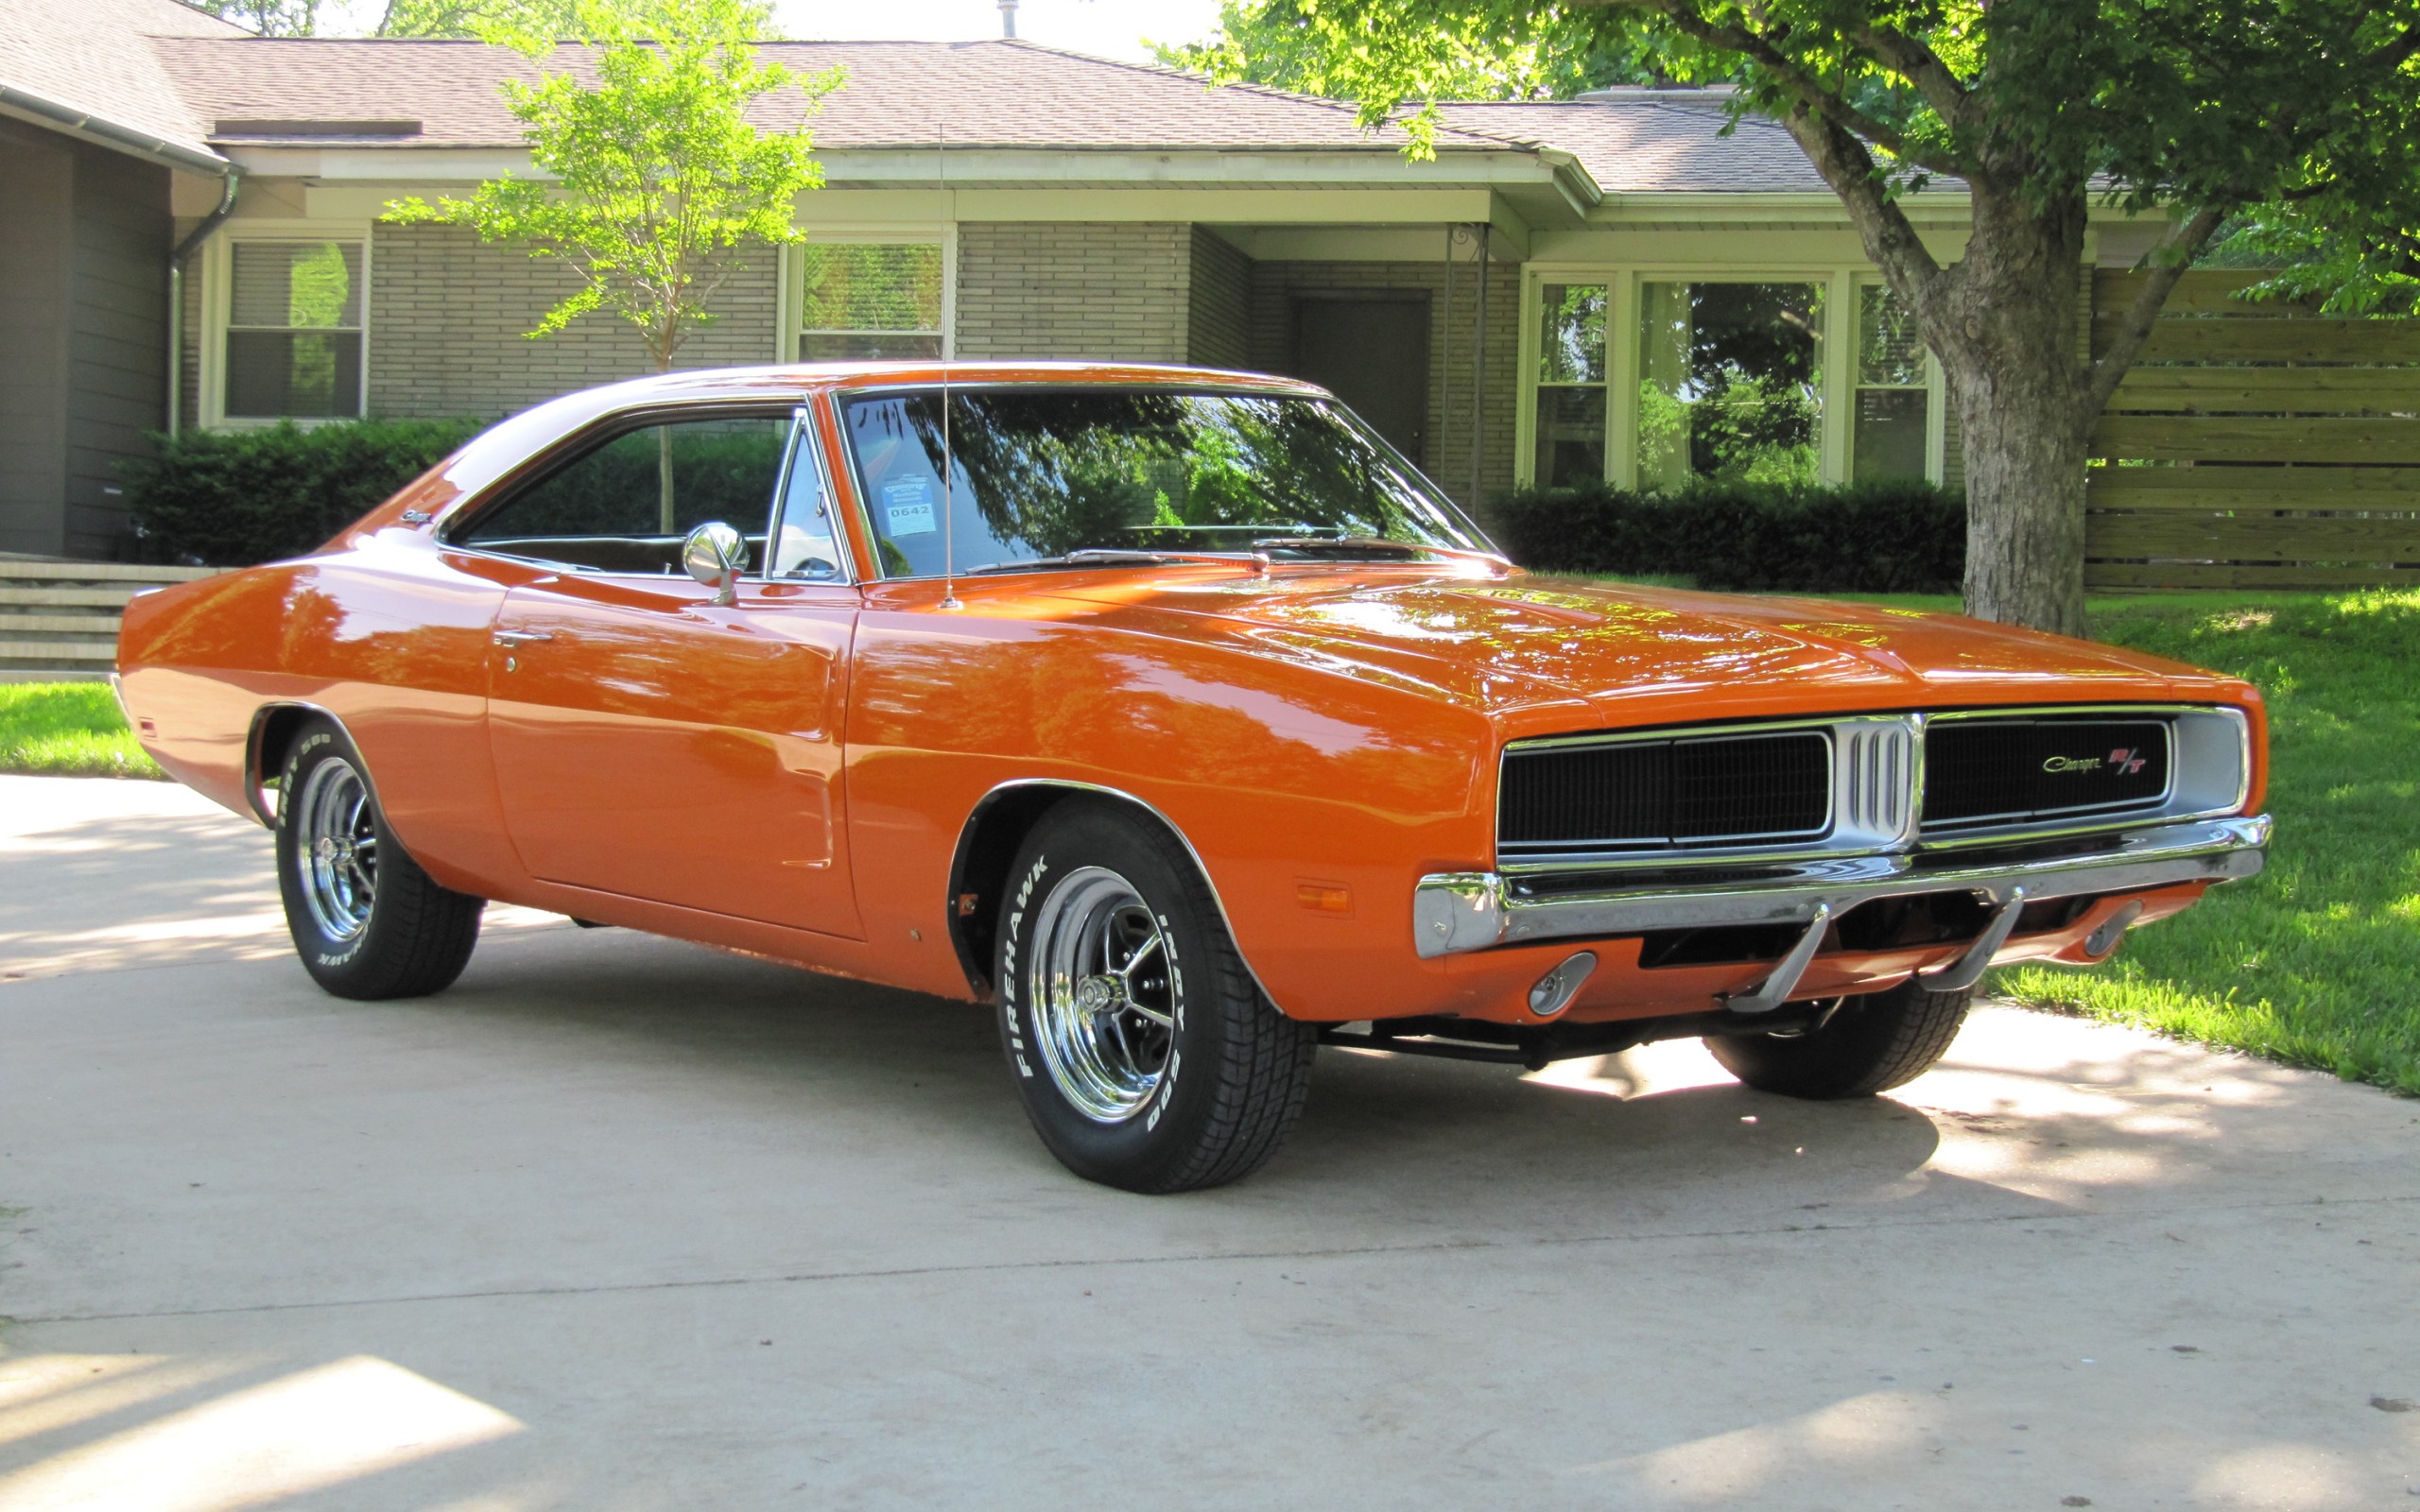 1969 Dodge Charger Rt 2560x1600 Wallpaper Mopars Of The Month Wallpaper